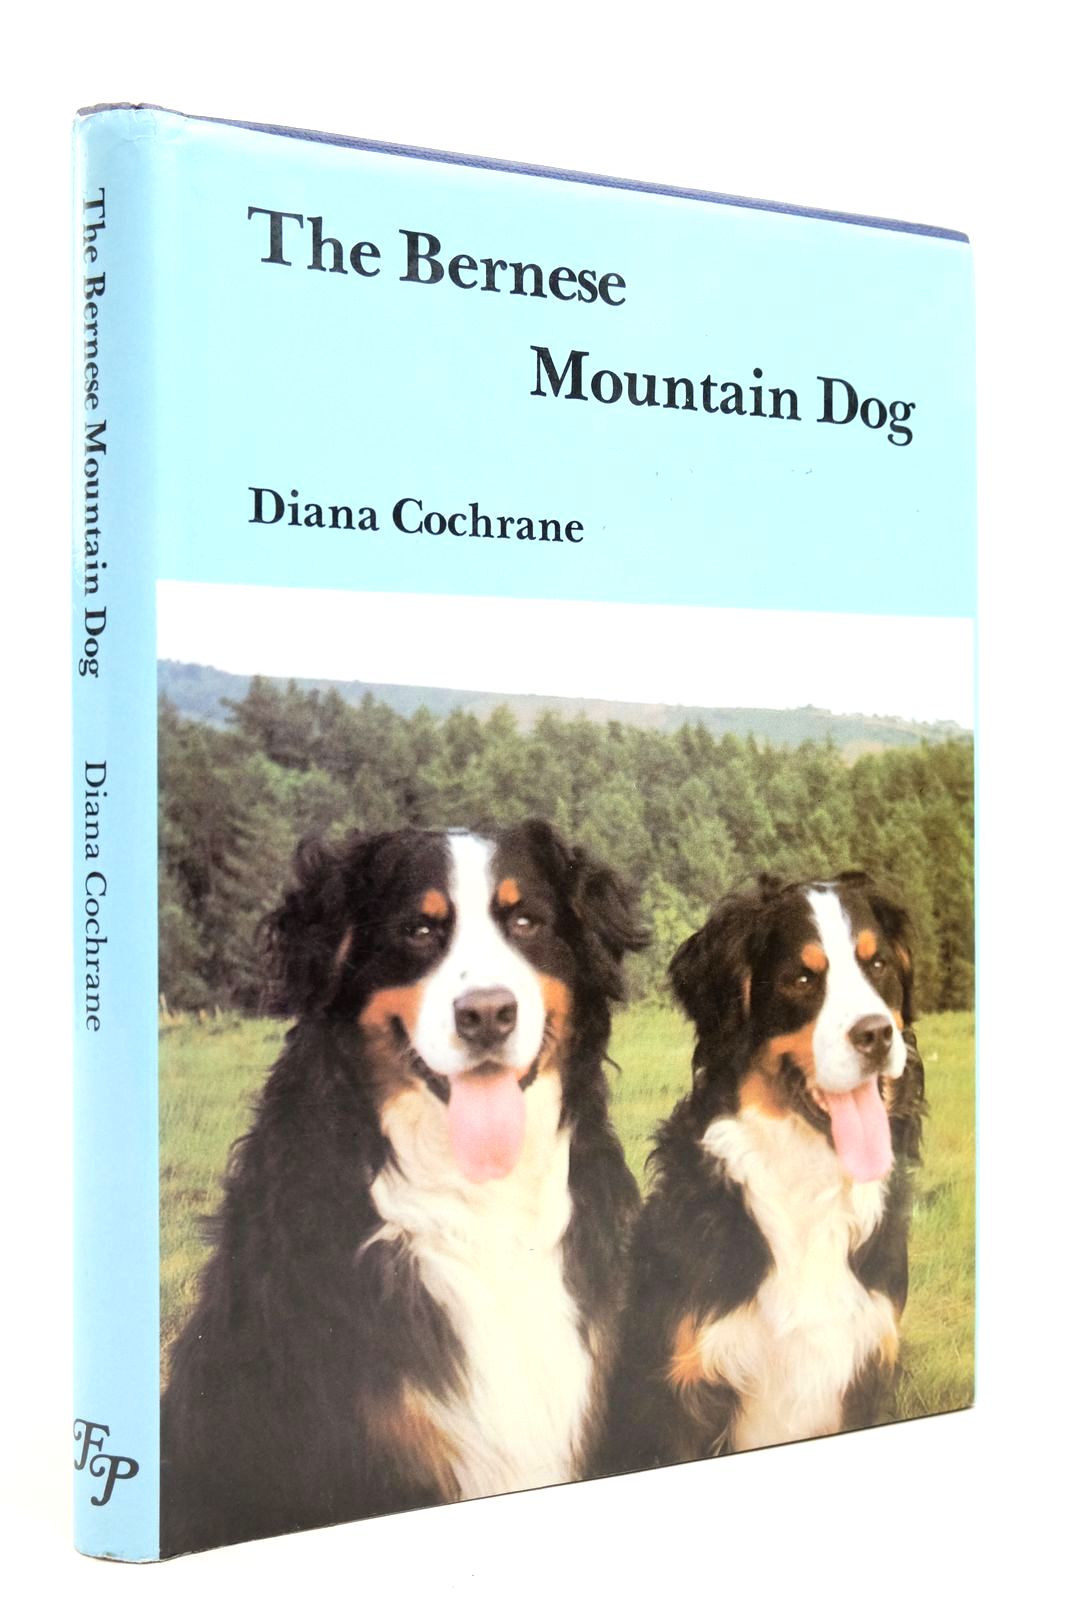 Photo of THE BERNESE MOUNTAIN DOG written by Cochrane, Diana published by Feoirlinn Publications (STOCK CODE: 2140431)  for sale by Stella & Rose's Books